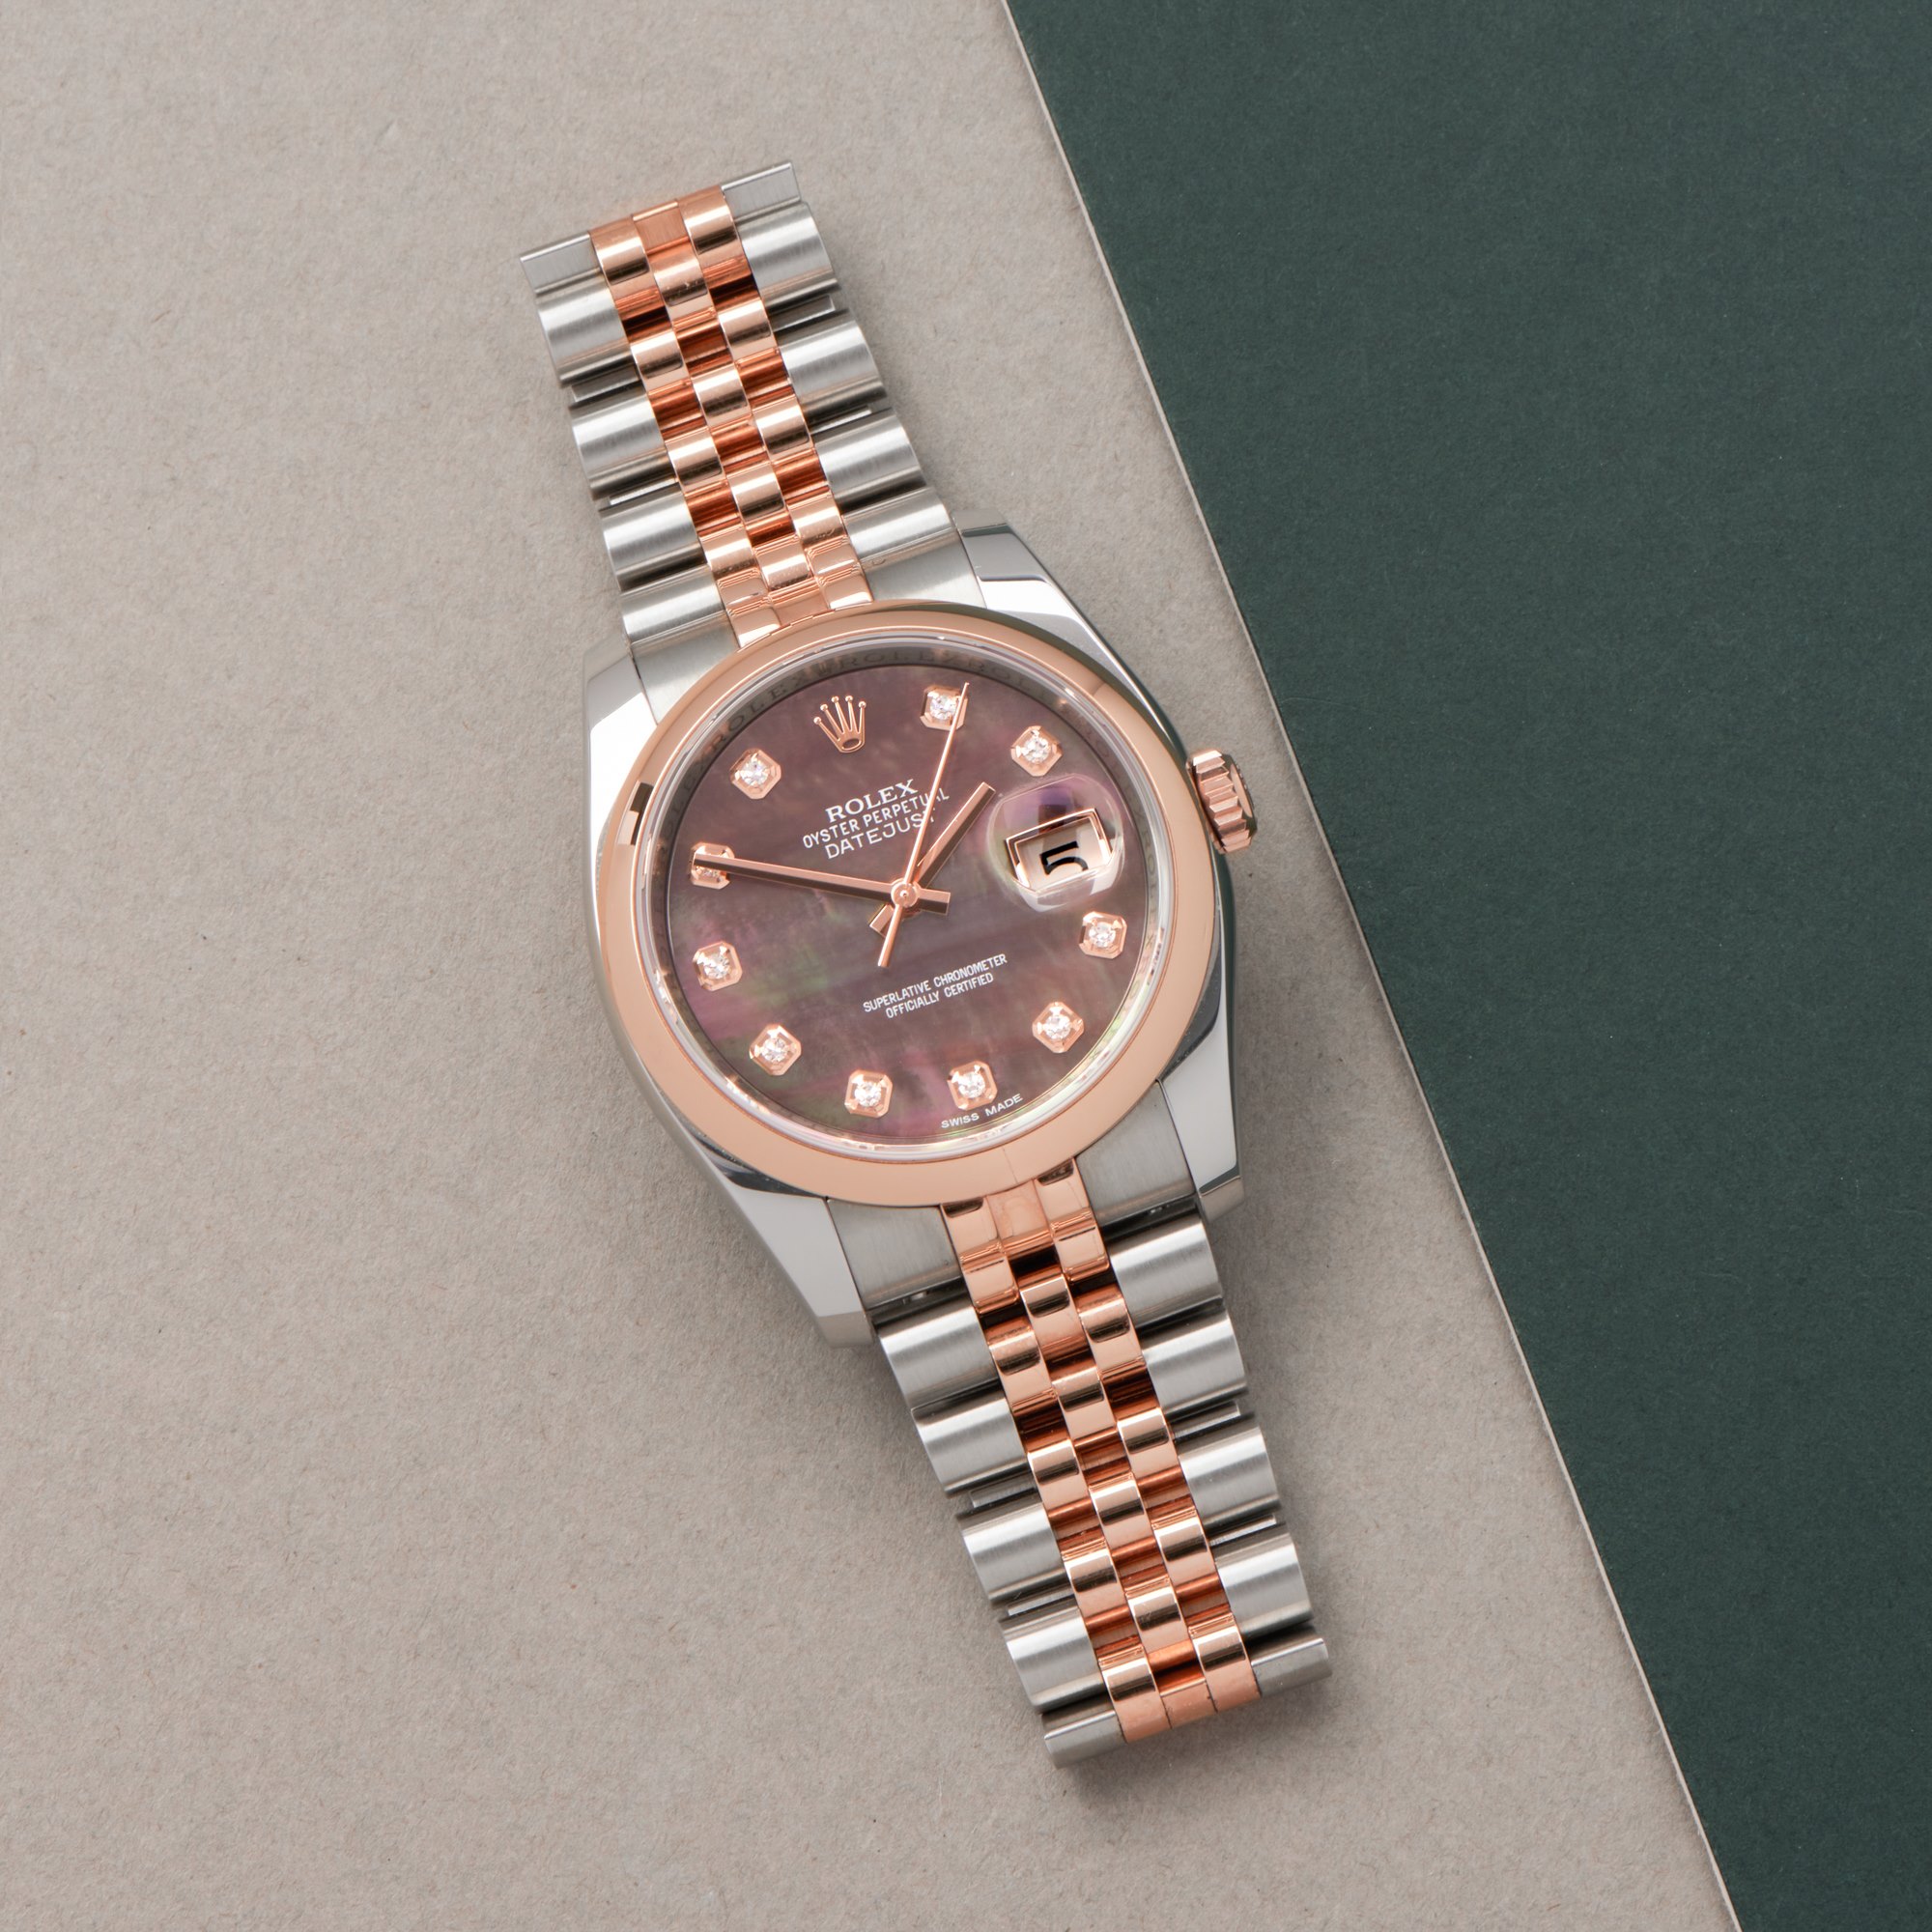 Rolex Datejust 36 18K Rose Gold & Stainless Steel 116201